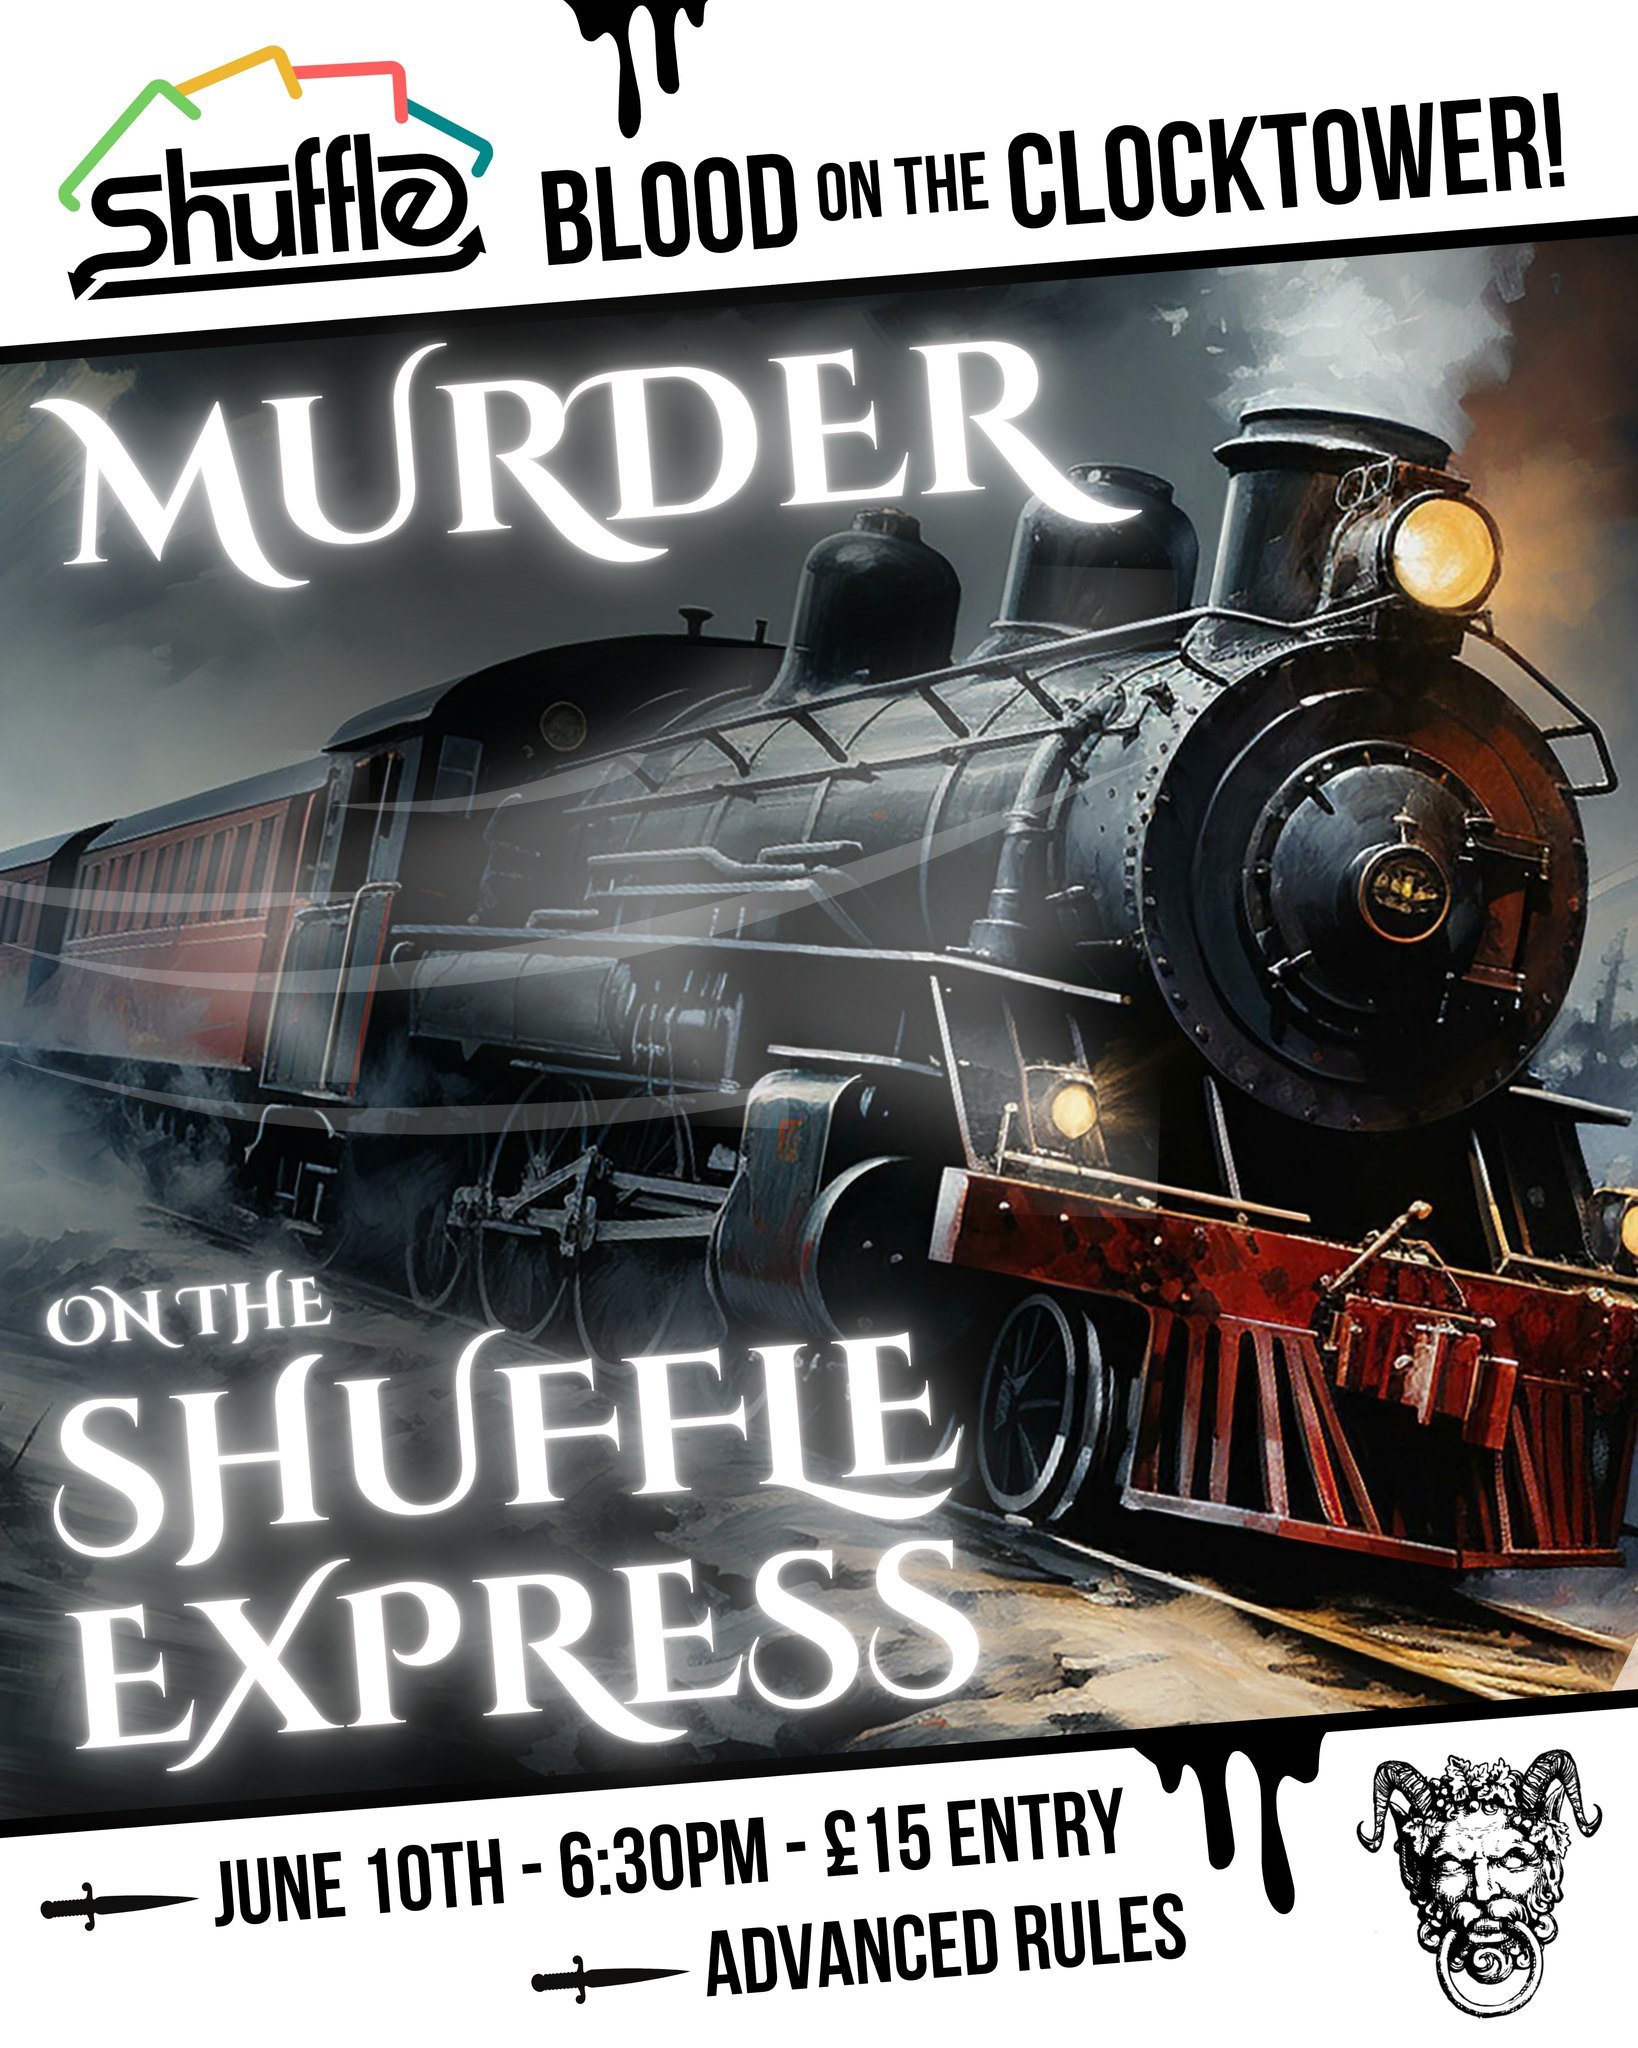 😈 It's time for another night of BLOOD ON THE CLOCKTOWER, Shuffle style! 😈

🚂 MURDER ON THE SHUFFLE EXPRESS 🚂

Somewhere deep in the snowy wastes of... Suffolk... the Shuffle Express has broken down! A freak summer snowstorm has stopped the train